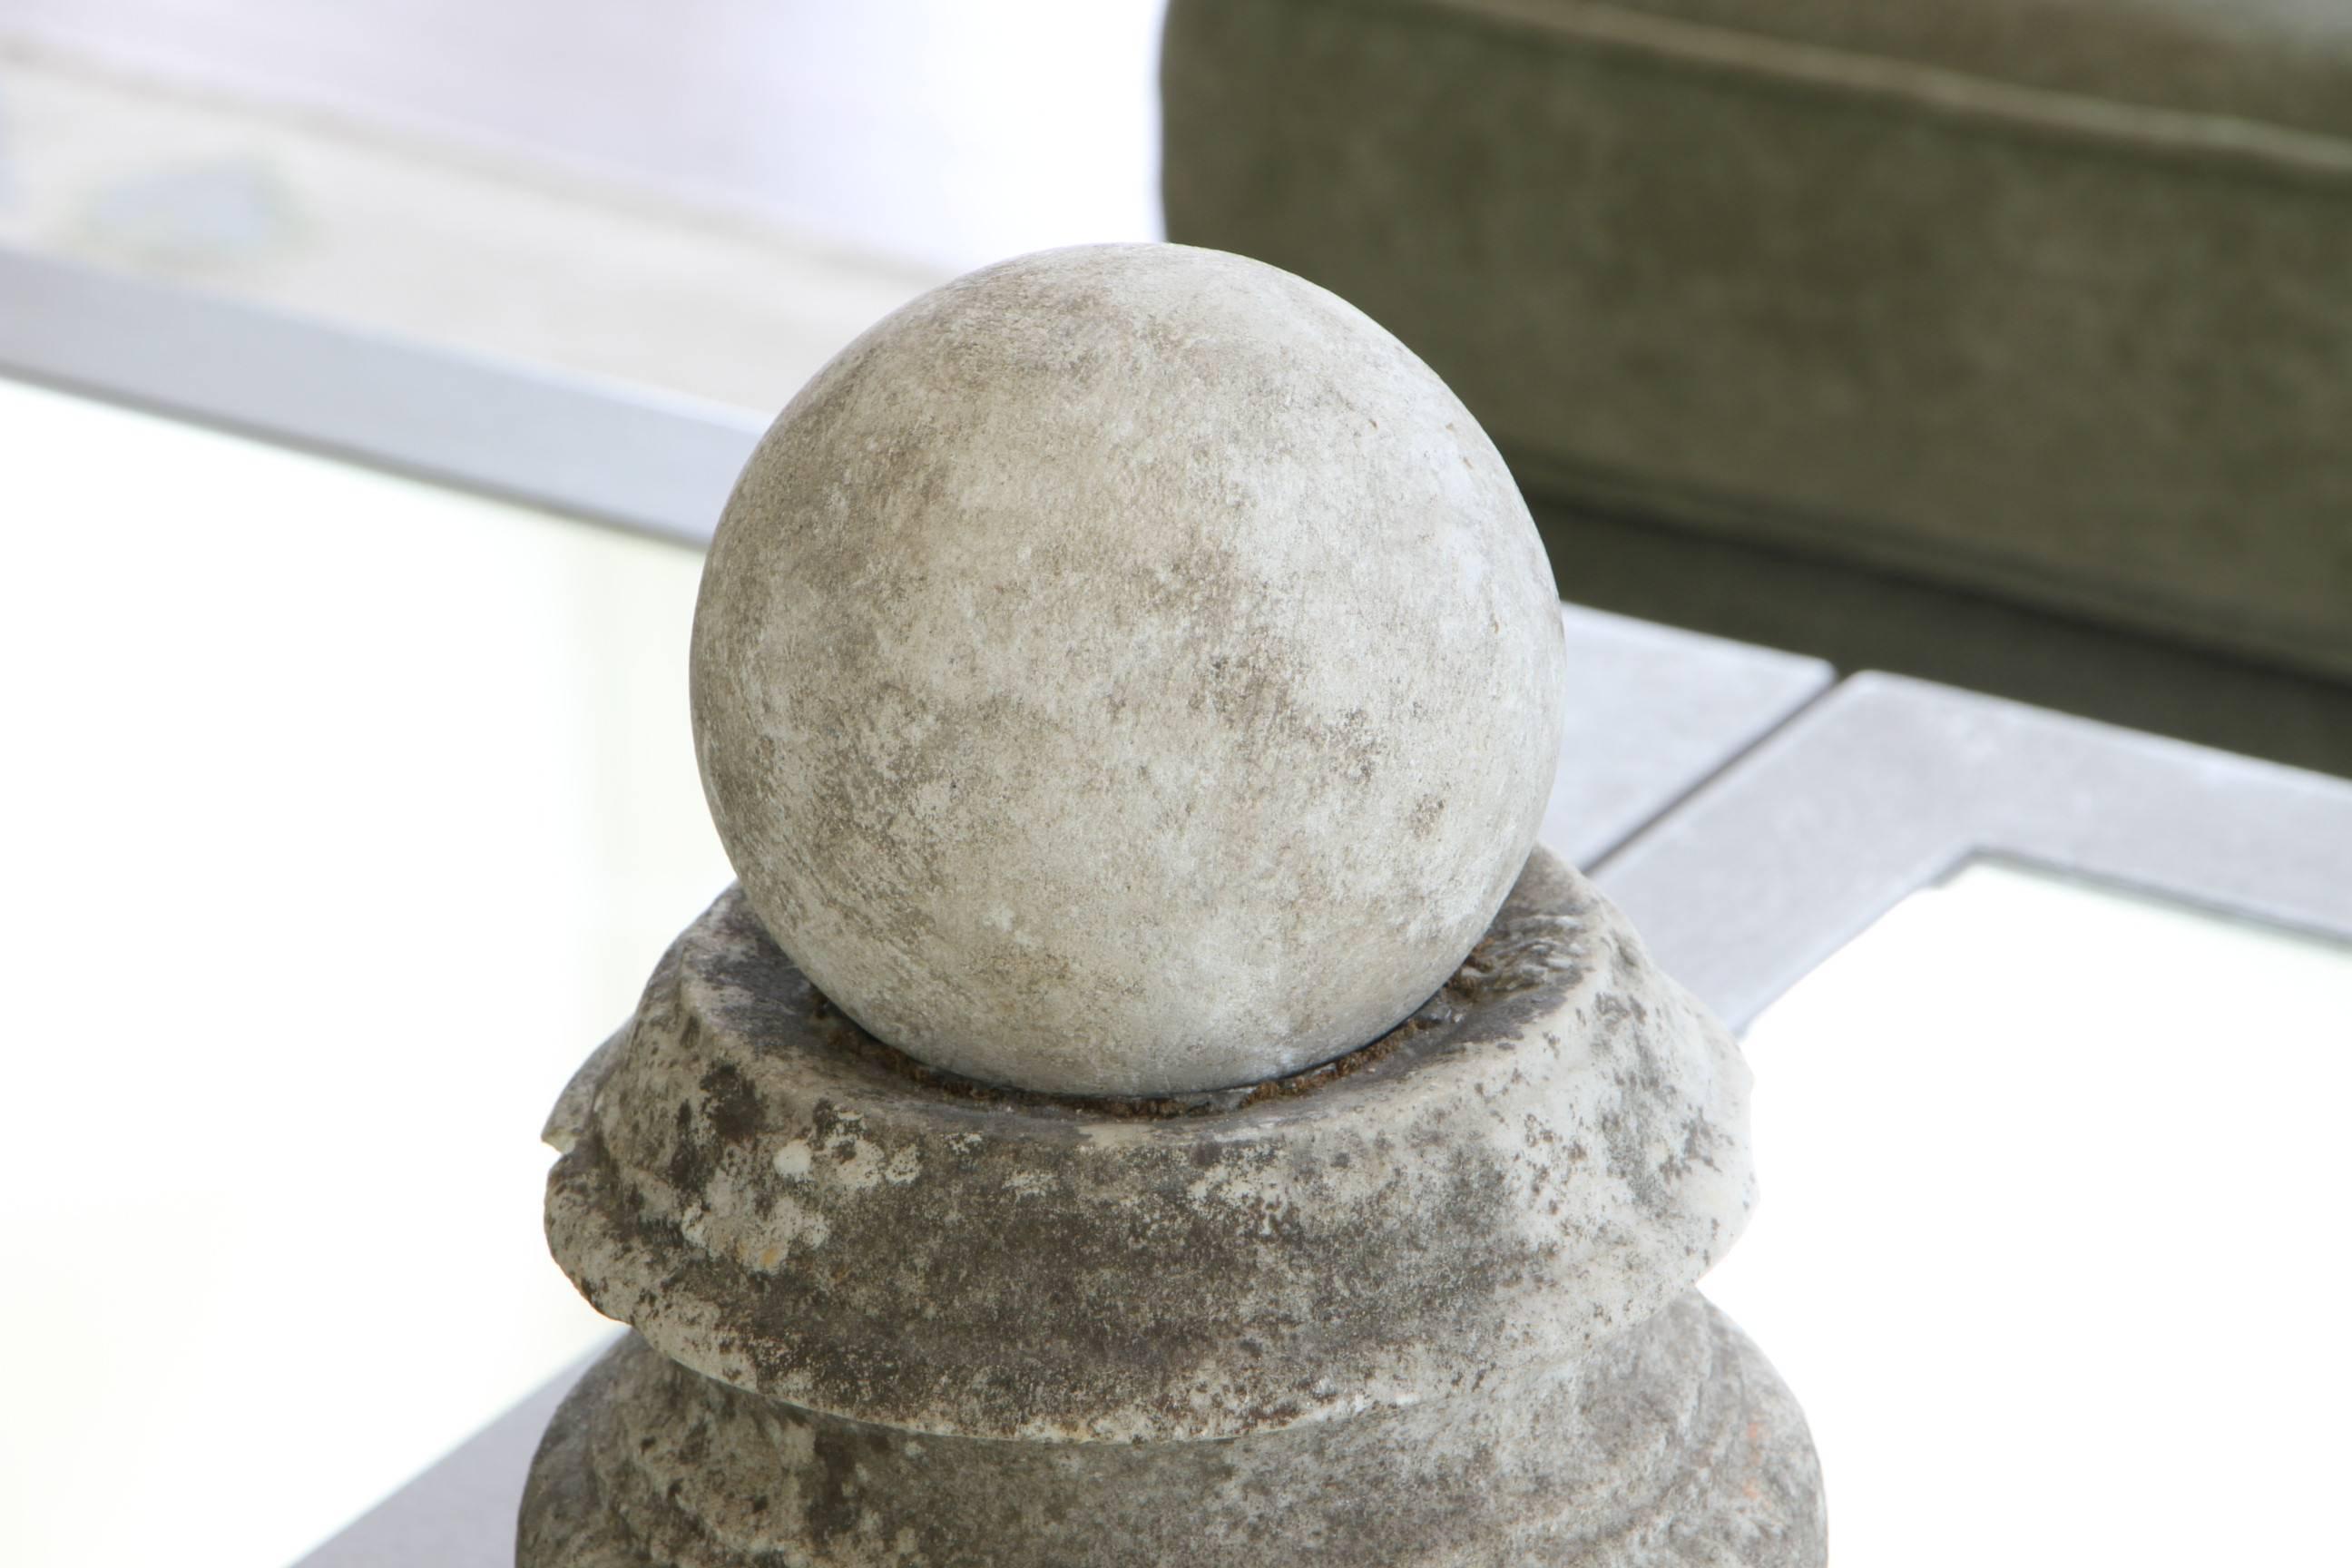 Fine worn urn and sphere on plinth base. Overall great age patina, including two chips under the urn's rim.